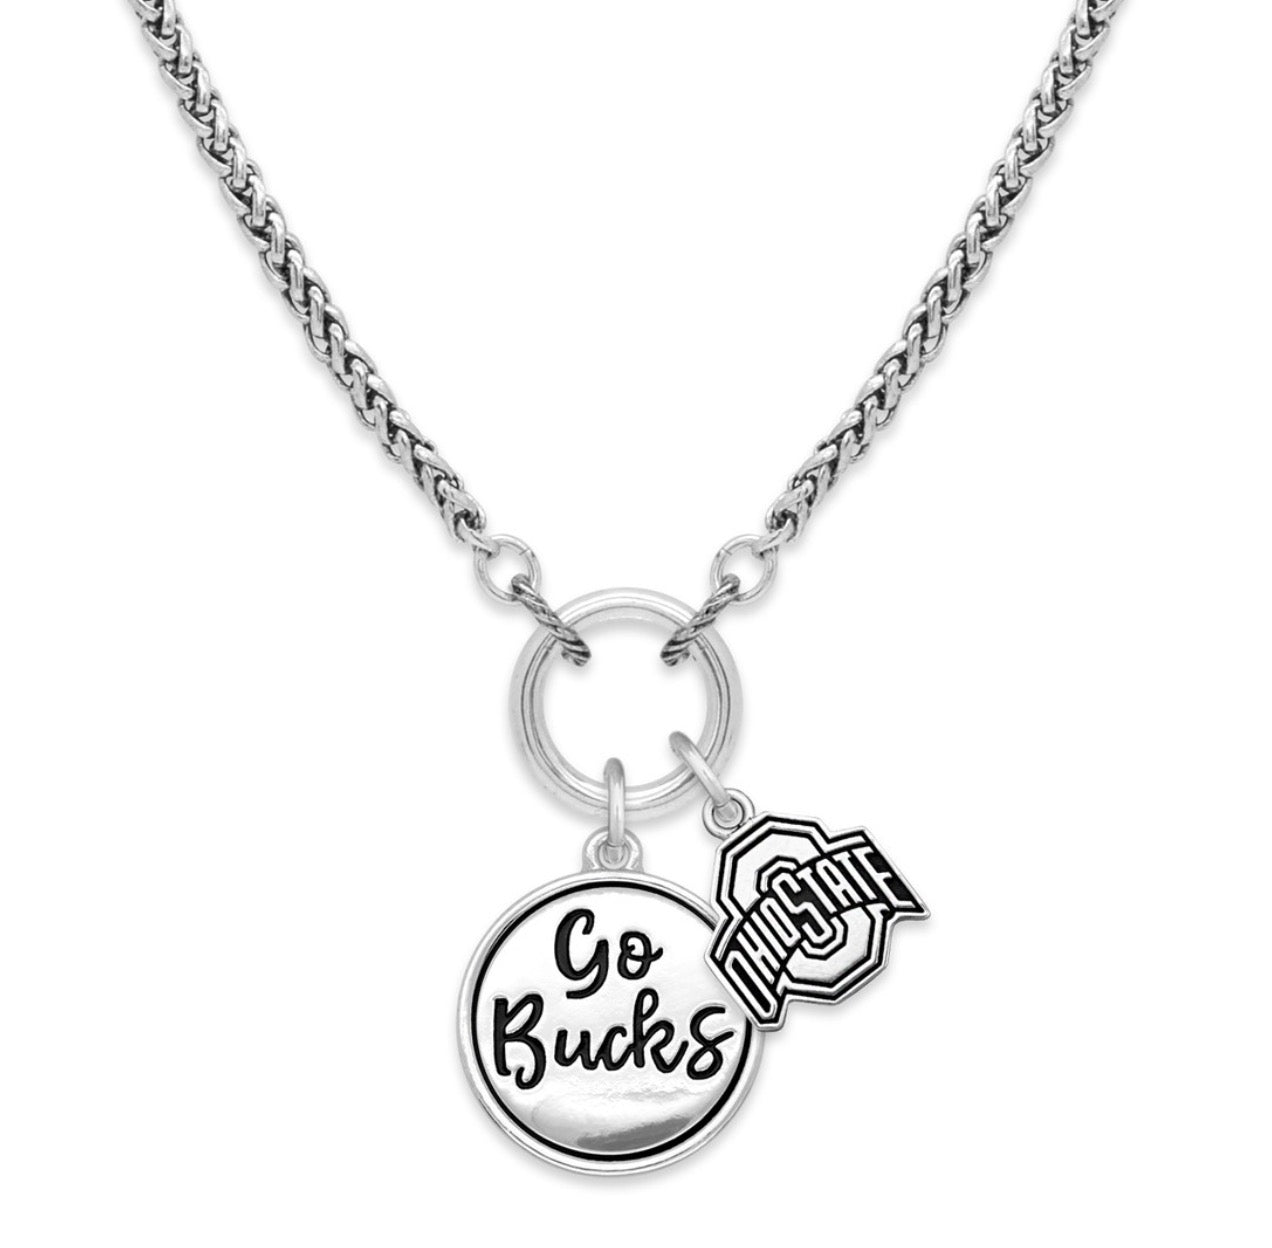 Ohio State Buckeyes Necklace - Twist and Shout